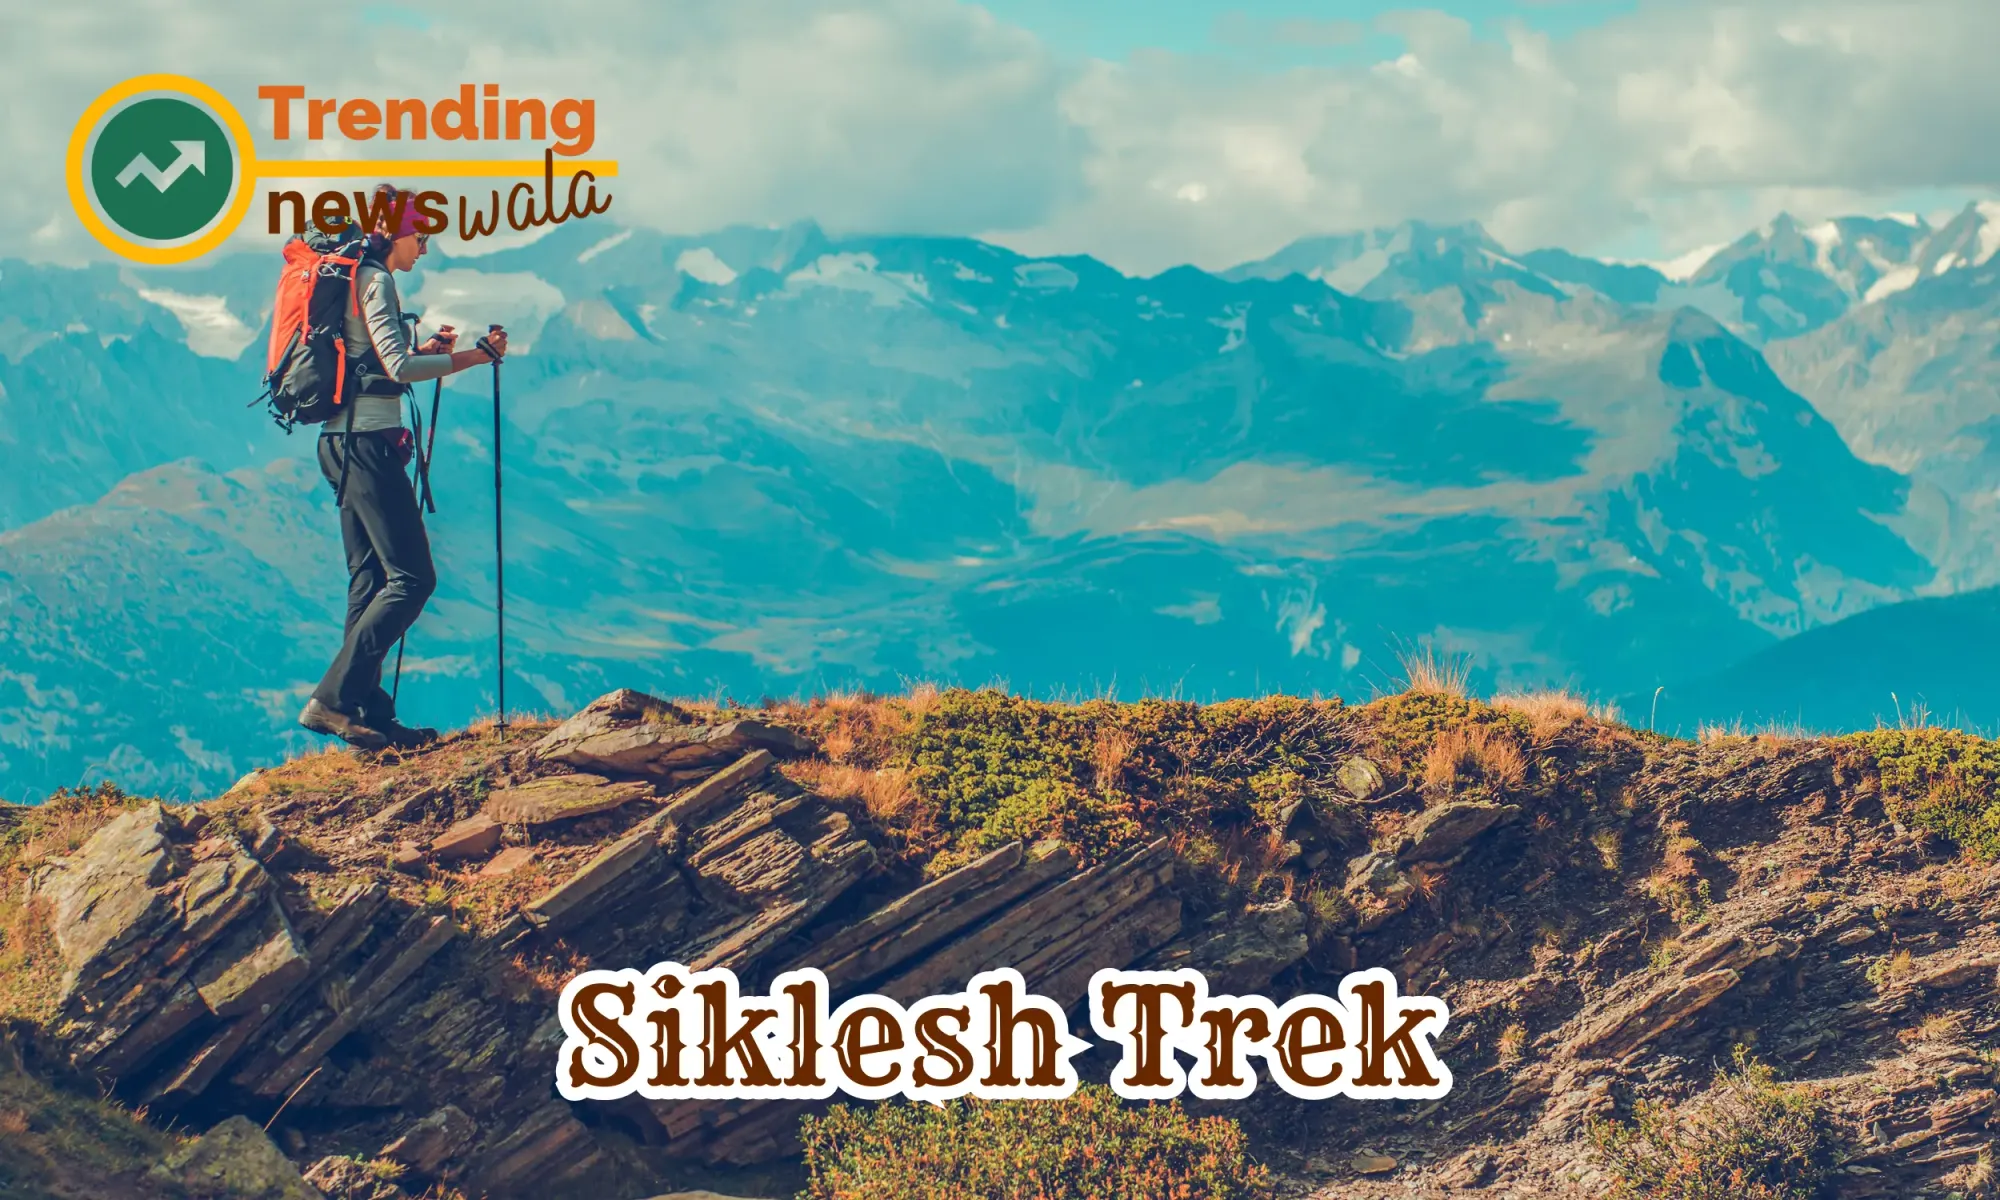 The Siklesh Trek is a picturesque trekking route in the Annapurna region of Nepal